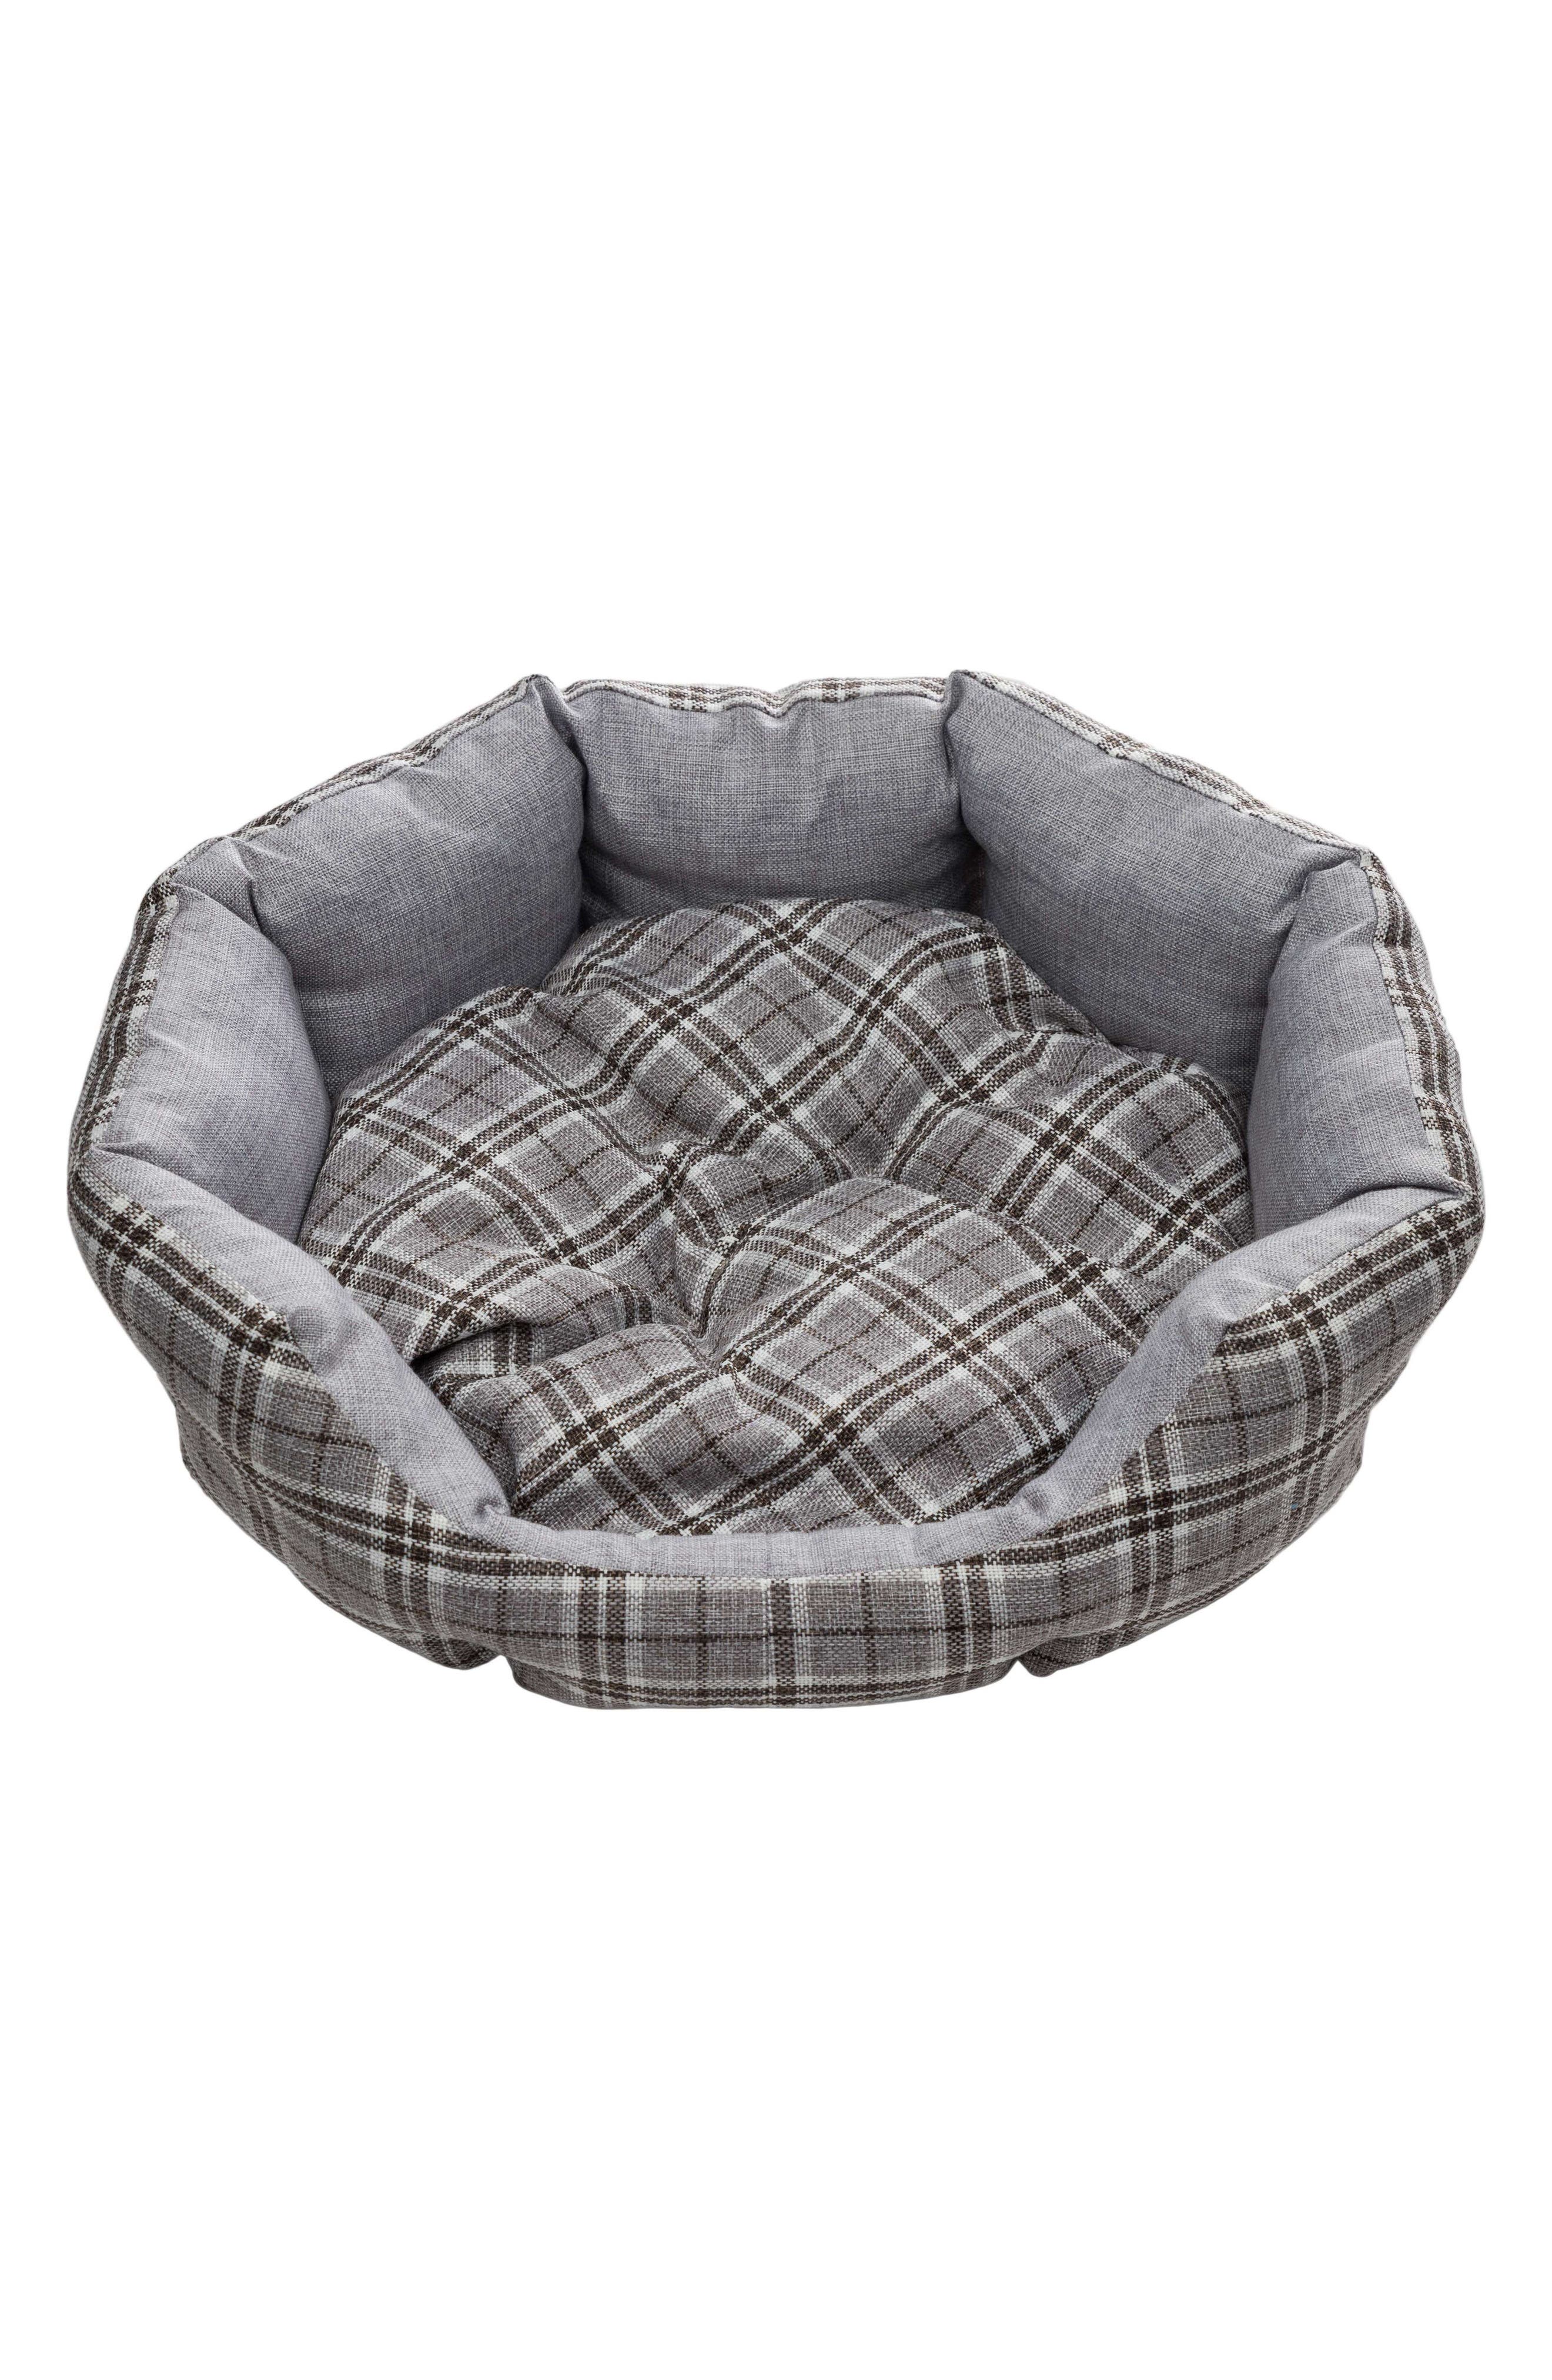 Duck River Textile Harlee Round Pet Bed In Grey